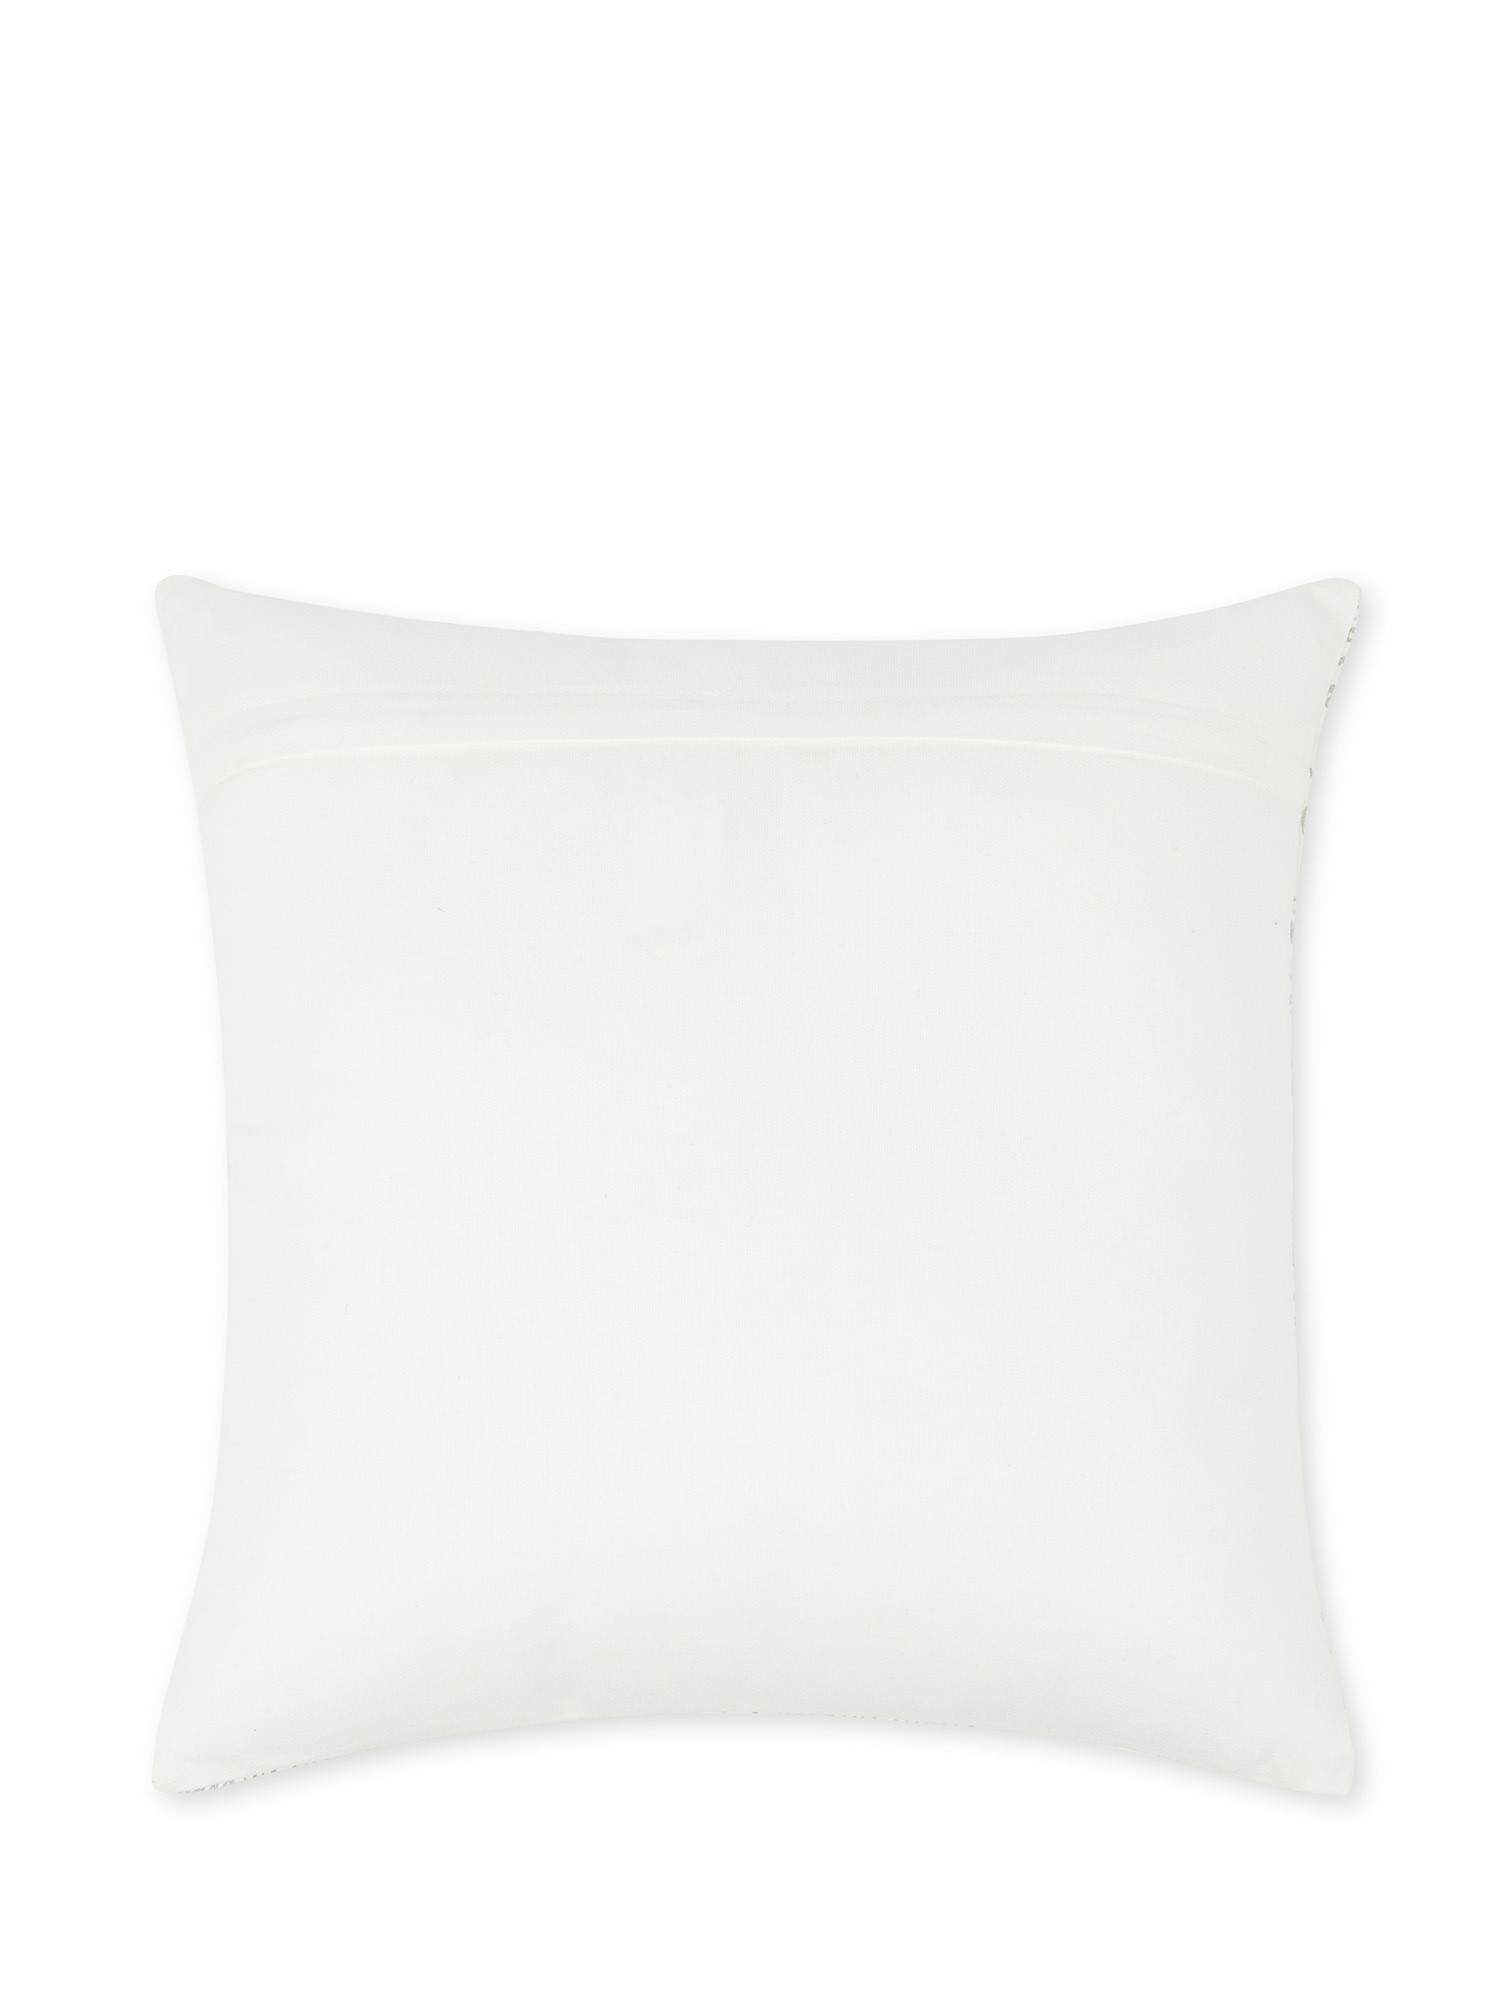 Embroidered fabric cushion 45x45cm, White, large image number 1